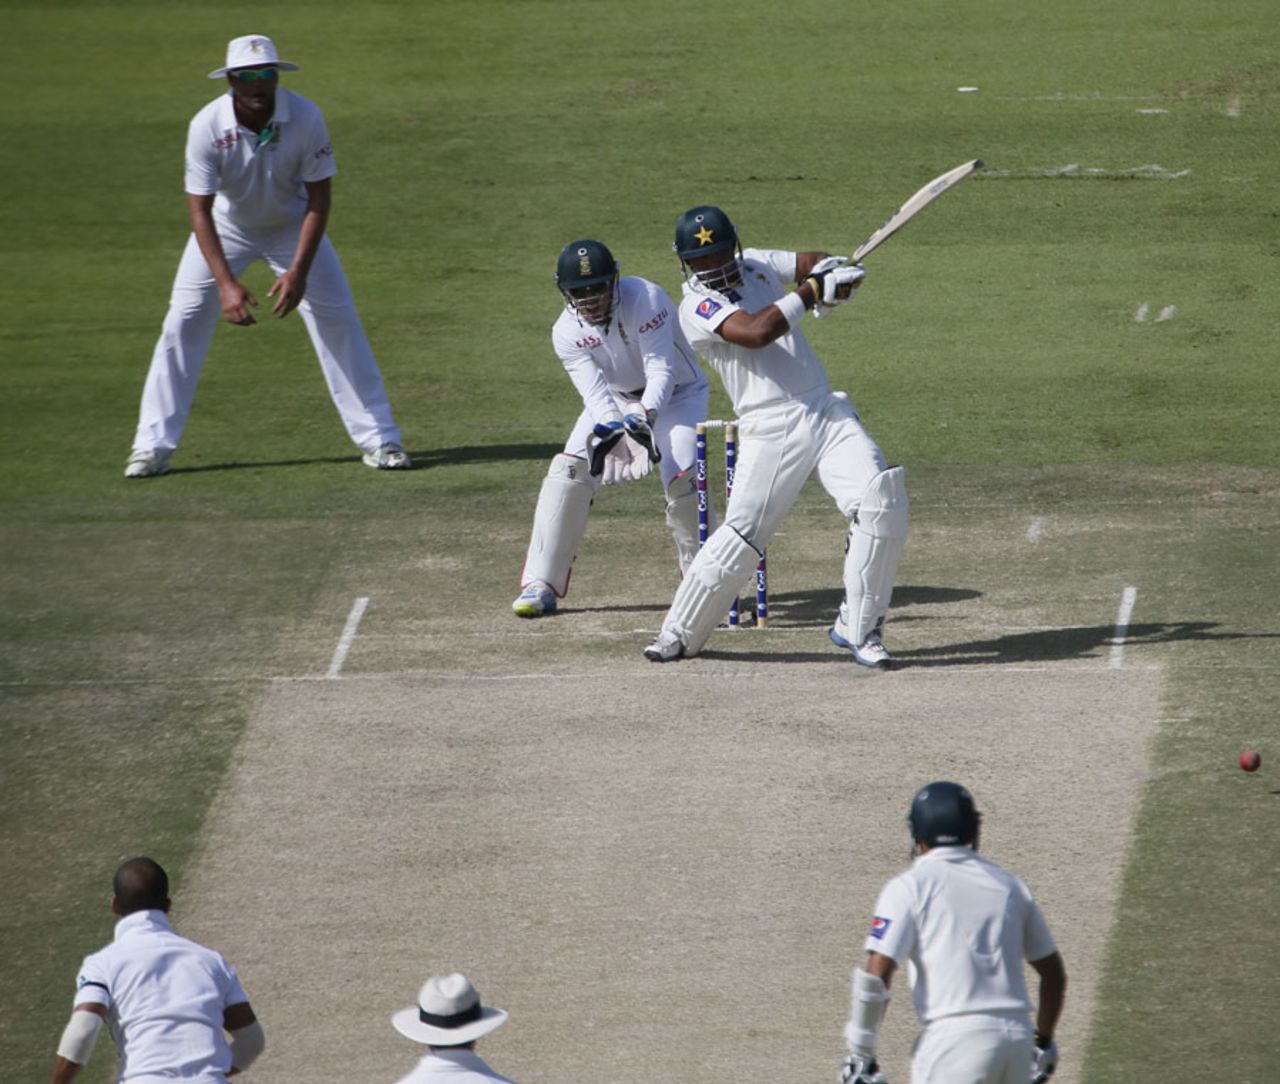 Khurram Manzoor pulls off the back foot, Pakistan v South Africa, 1st Test, Abu Dhabi, 2nd day, October 15, 2013